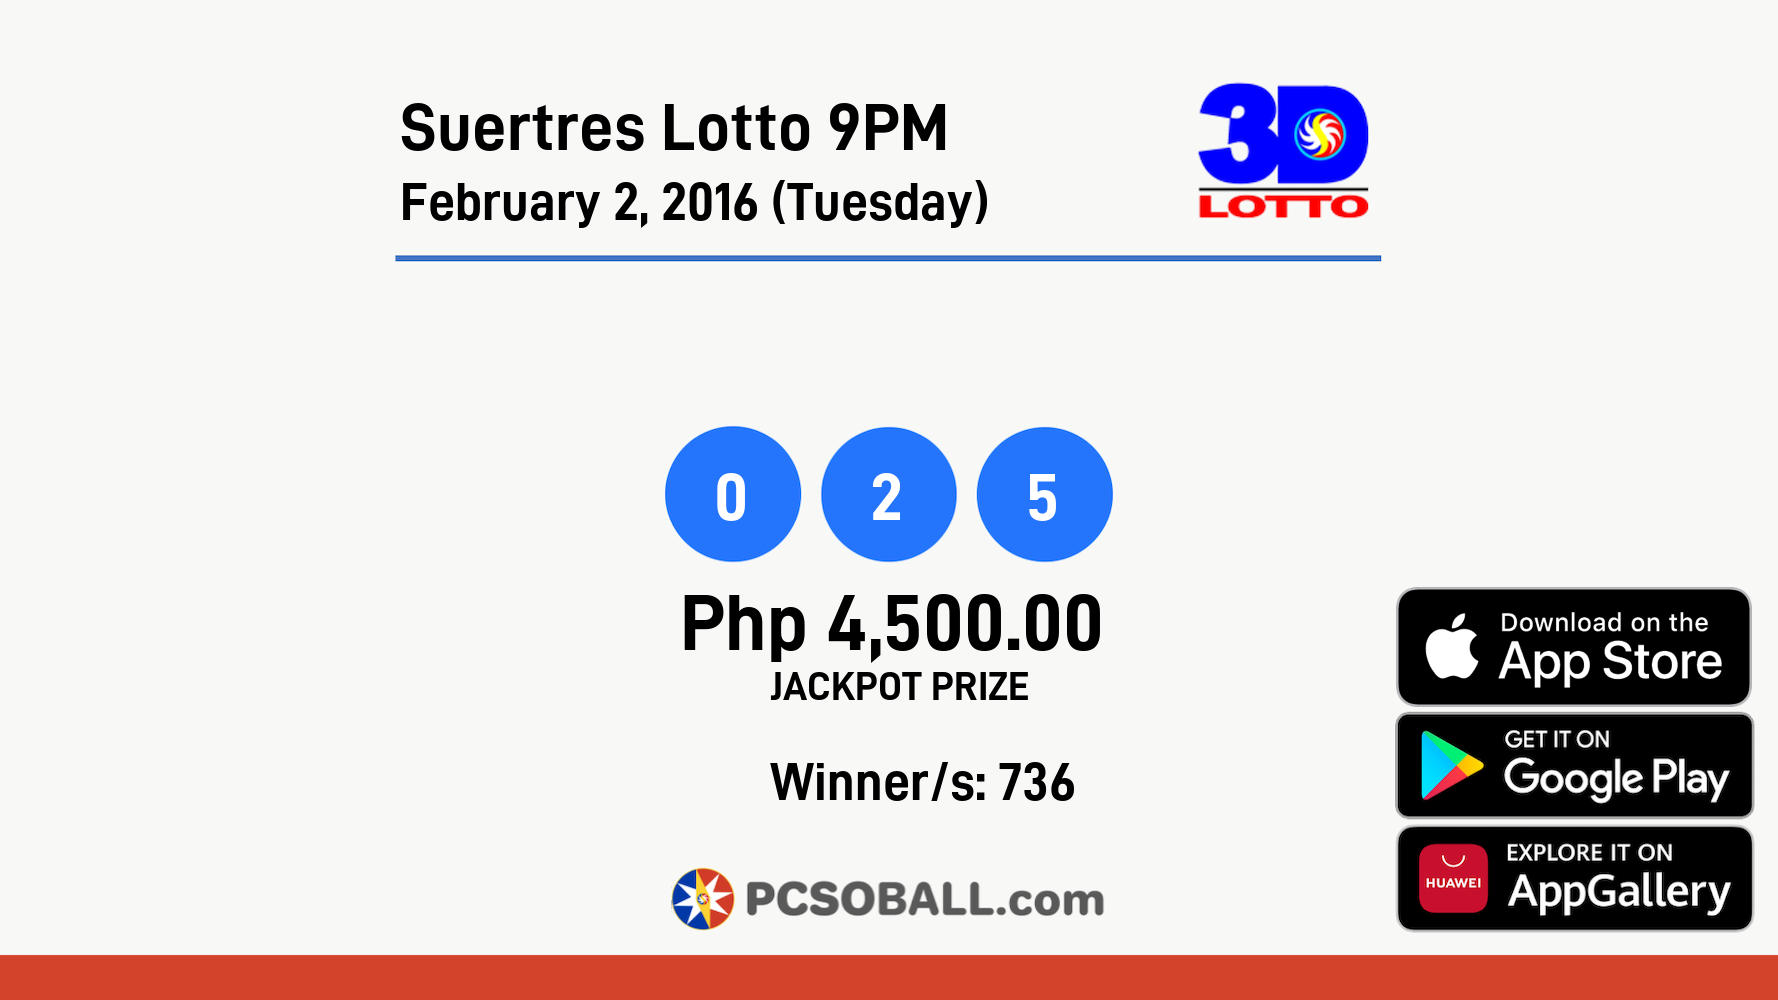 Suertres Lotto 9PM February 2, 2016 (Tuesday) Result